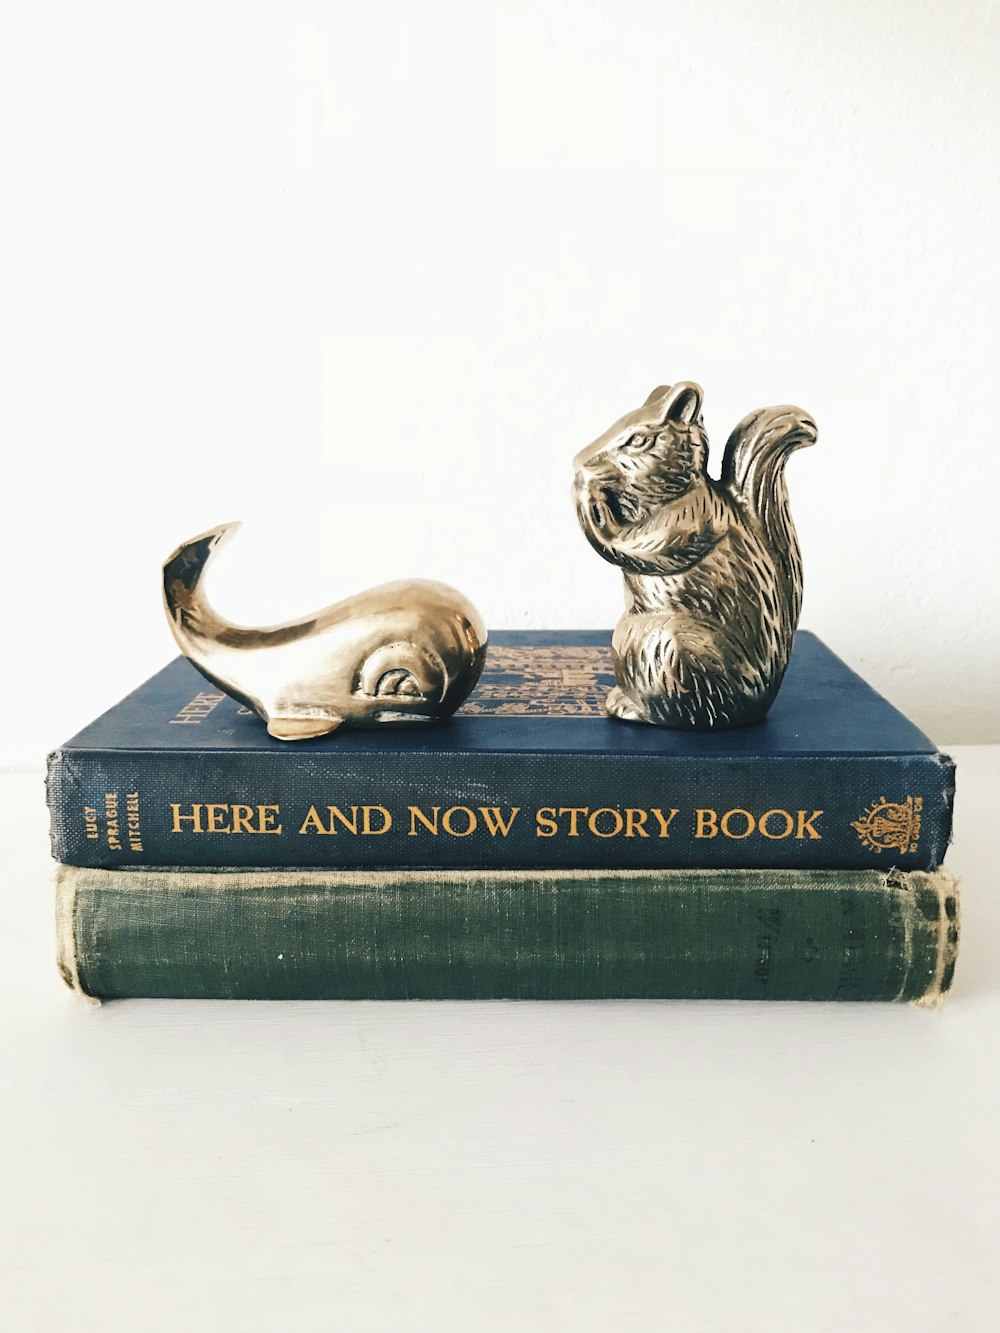 gray and white rabbit figurine on green book